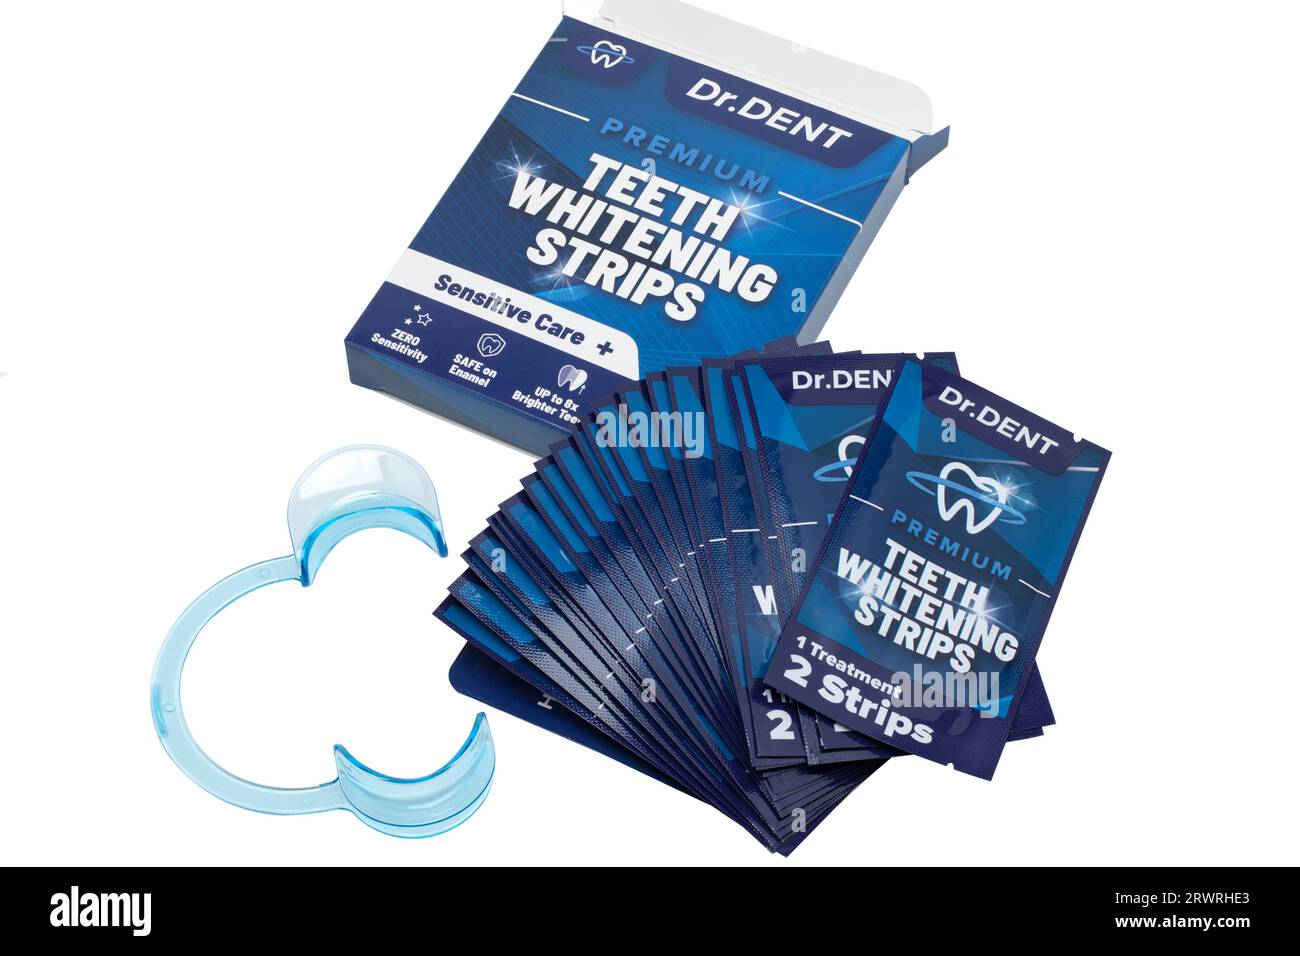 Box and Sachets of Teeth Whitening Strips from Dr.Dent, Premium Sensitive Care Plus, one sachet, two Strips, one Treatment, 40 Strips Total Stock Photo